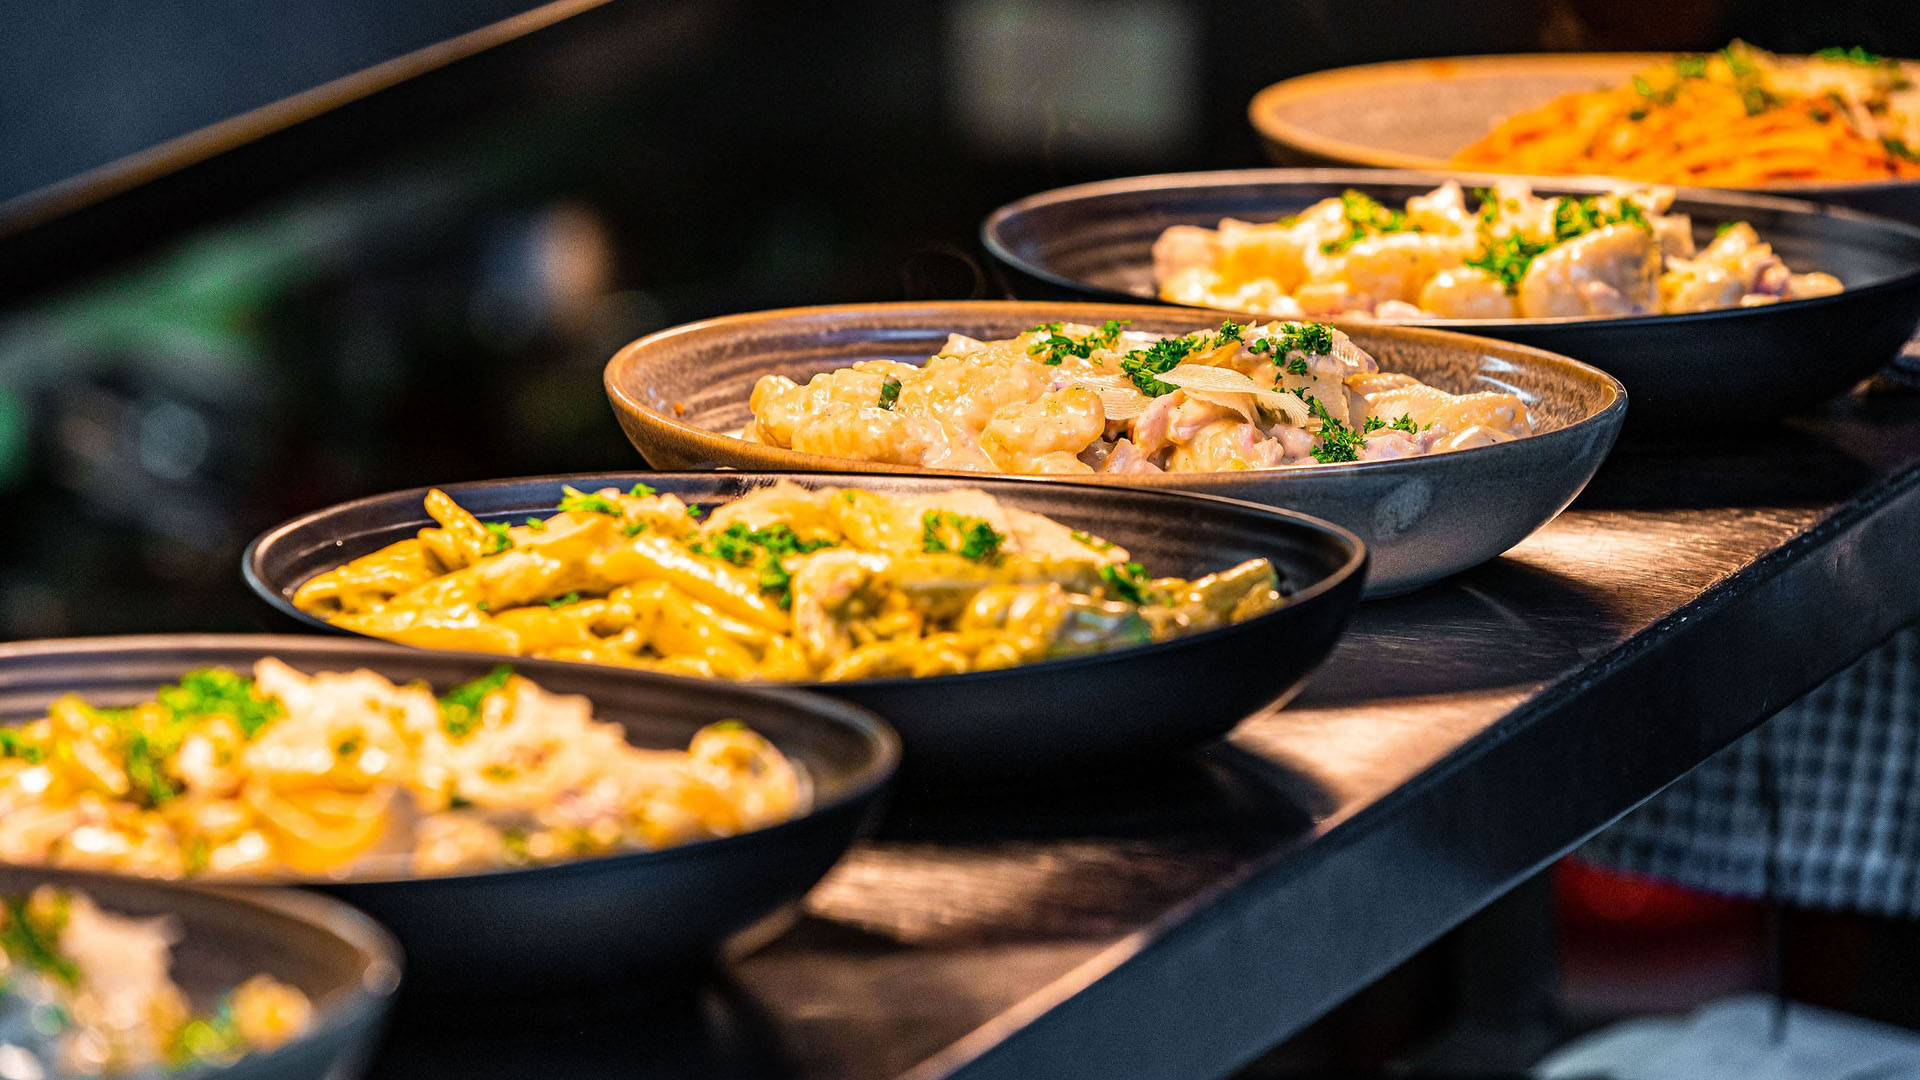 Image is of a row of black bowls filled with pasta and gnocchi under lights